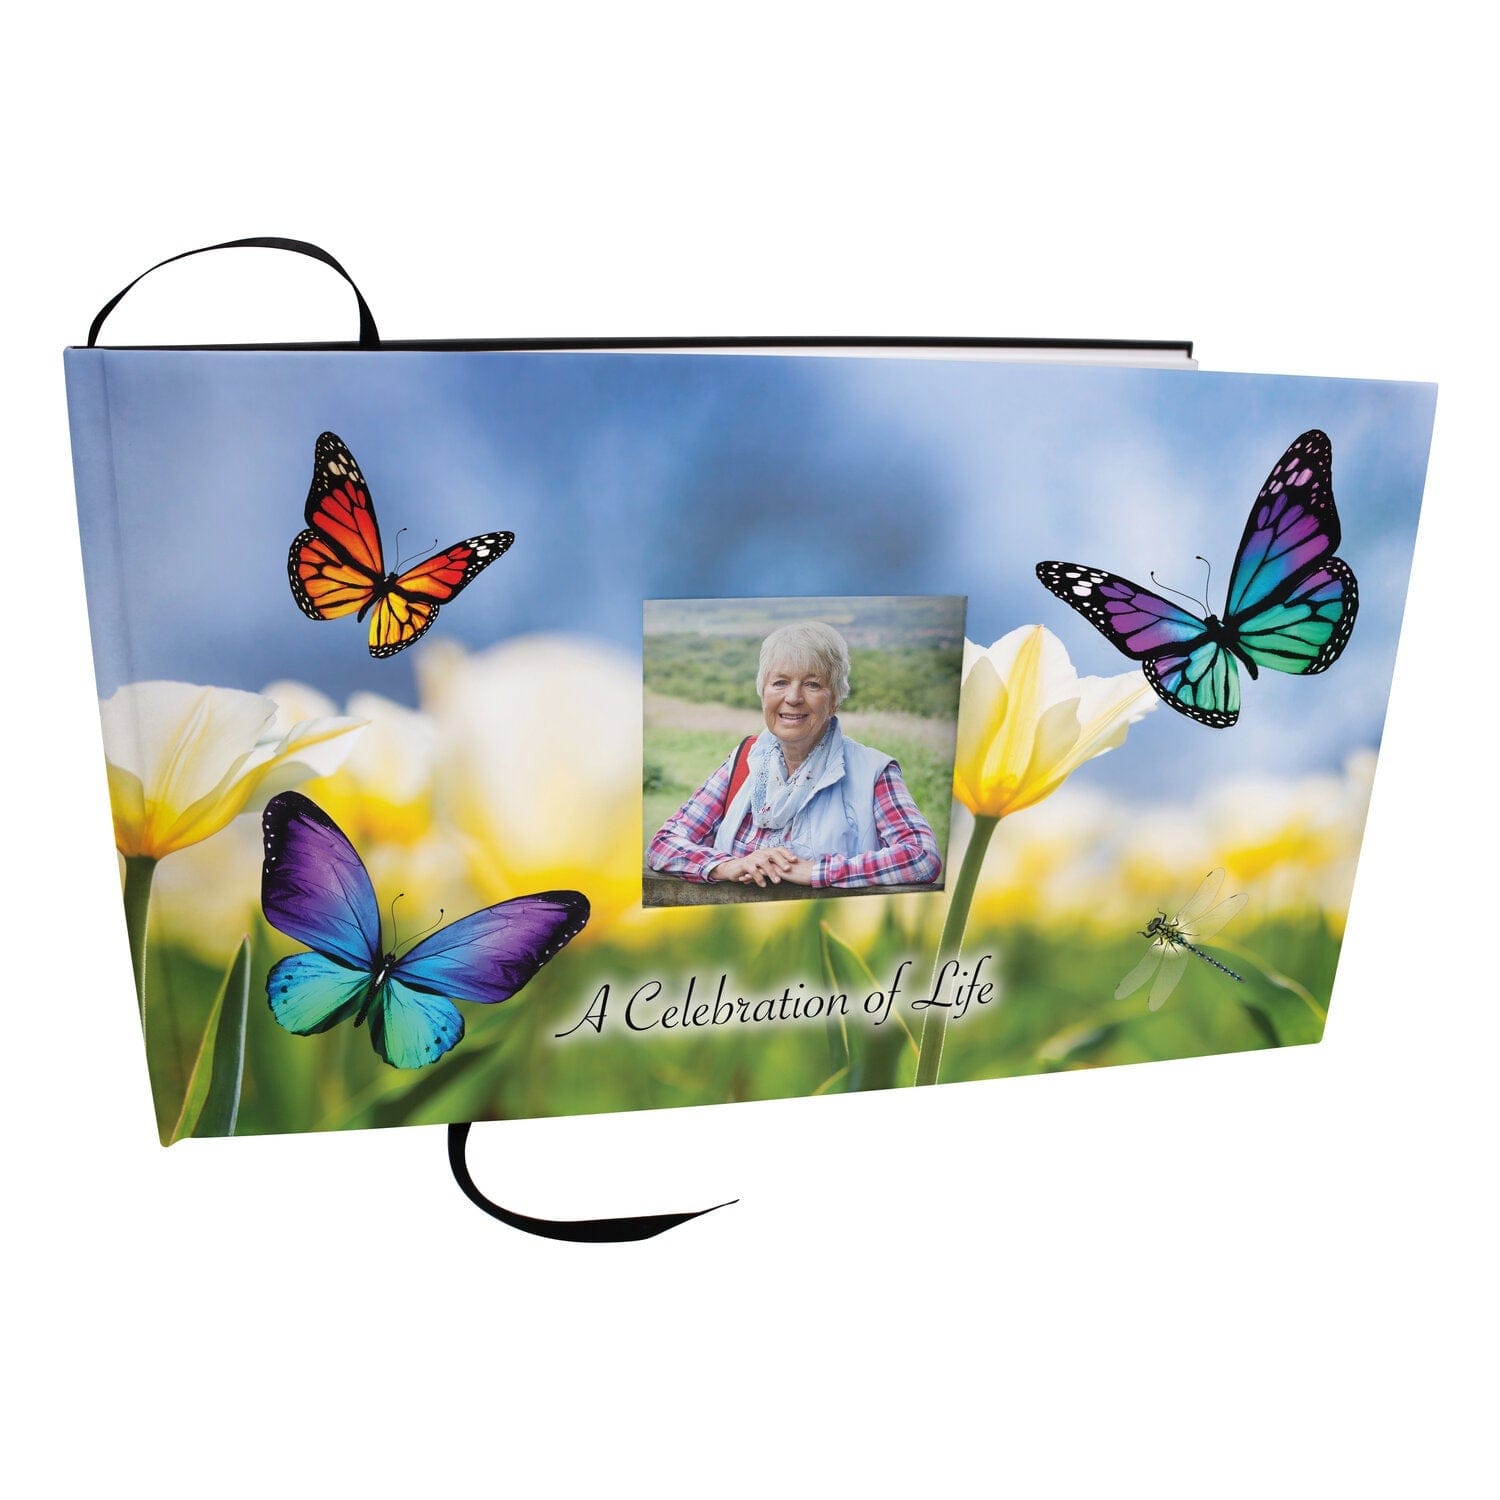 Commemorative Cremation Urns Wild Butterflies Matching Themed 'Celebration of Life' Guest Book for Funeral or Memorial Service